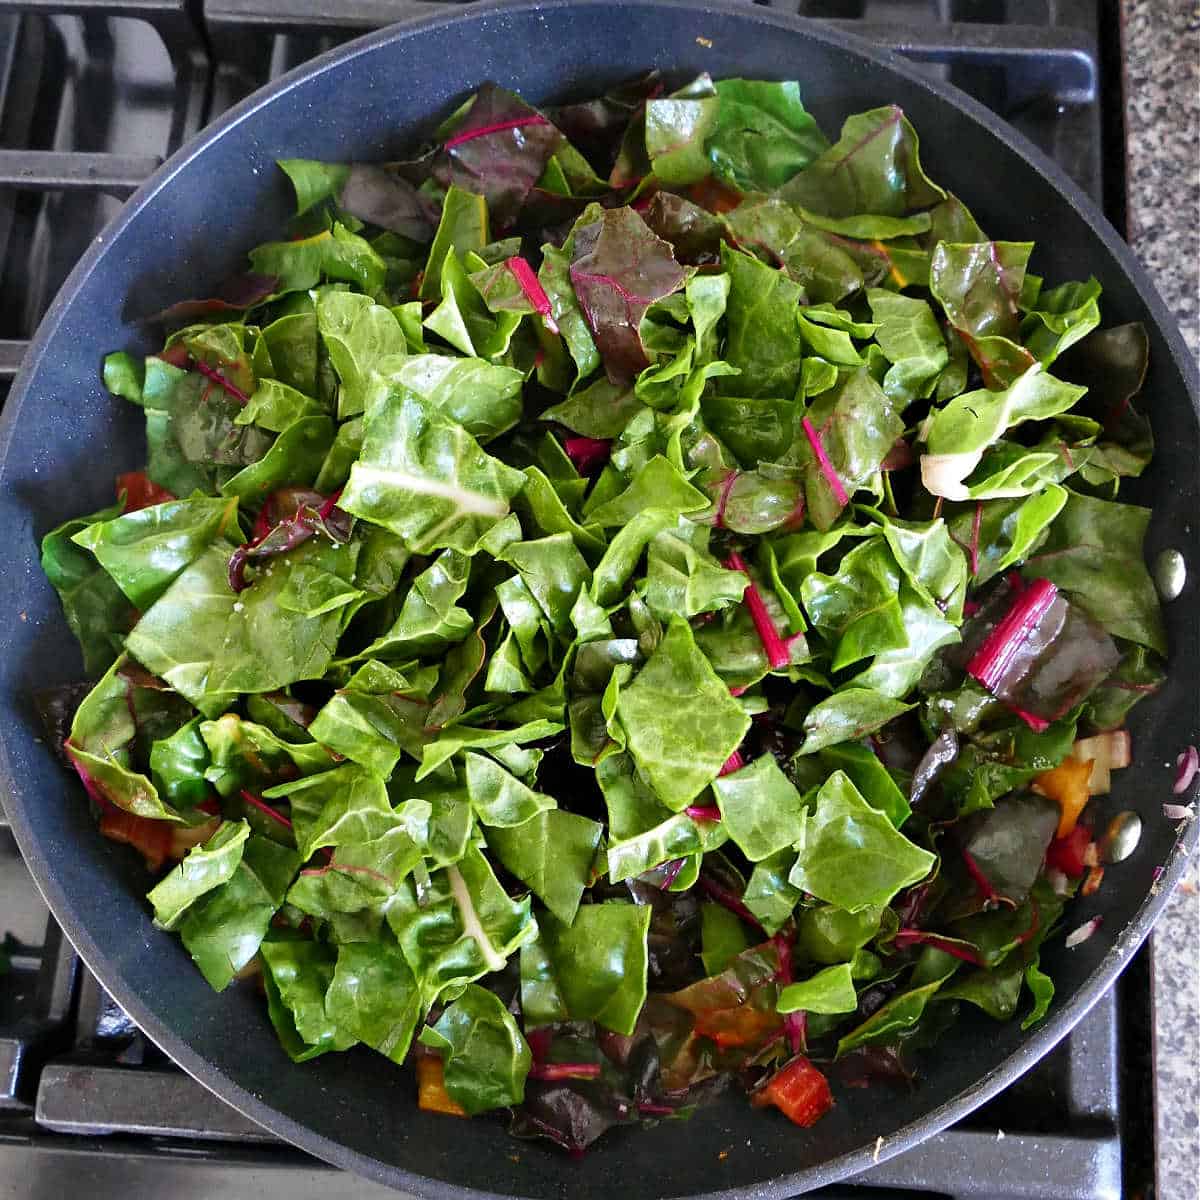 chard leaves added to a skillet with chard stems cooking in olive oil